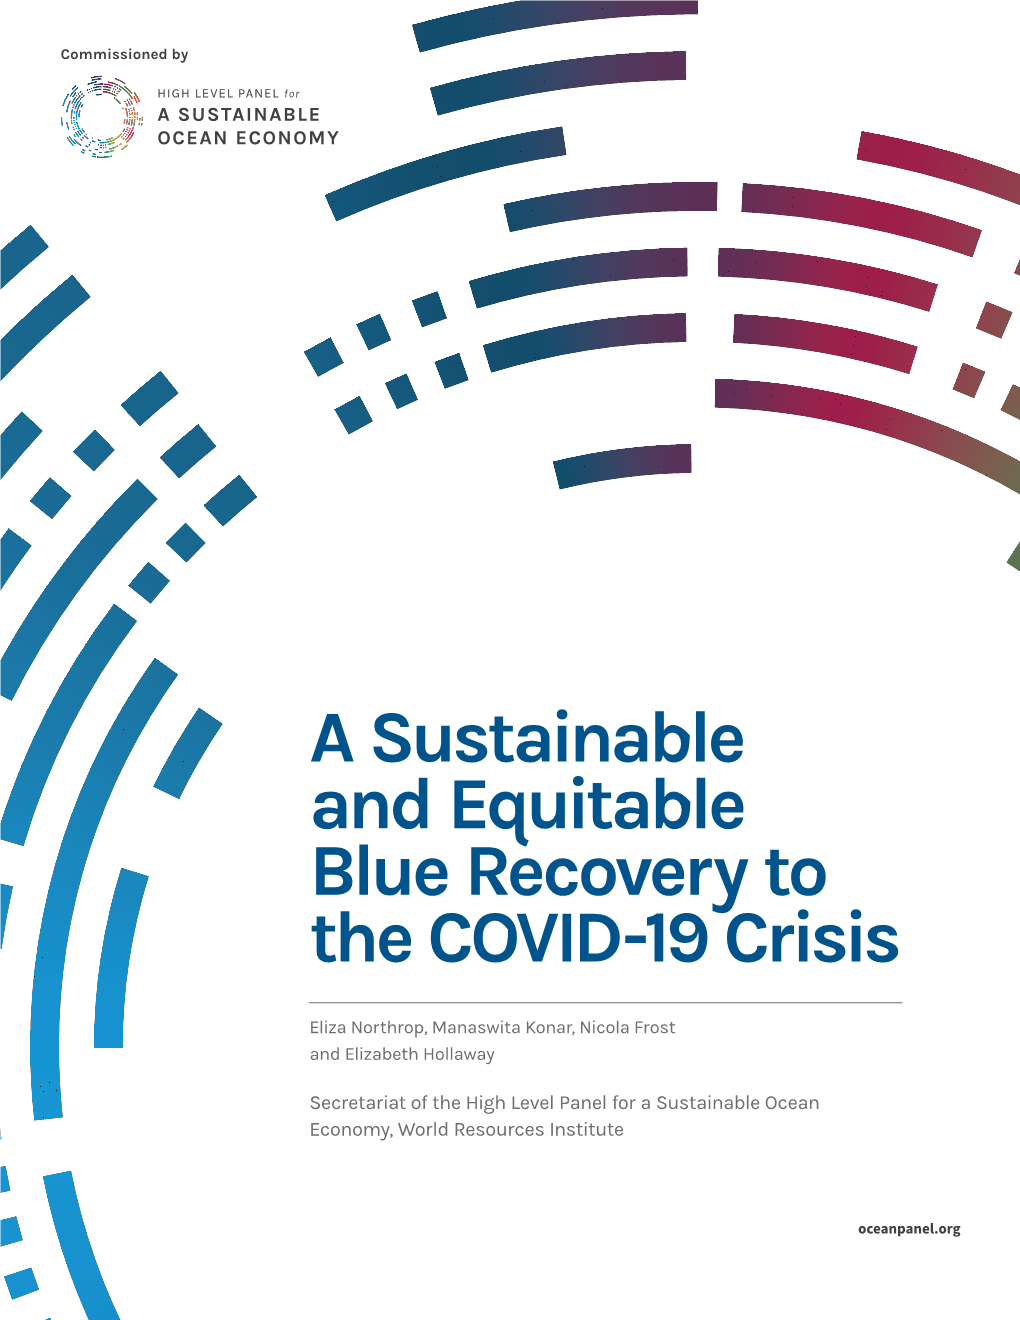 A Sustainable and Equitable Blue Recovery to the COVID-19 Crisis